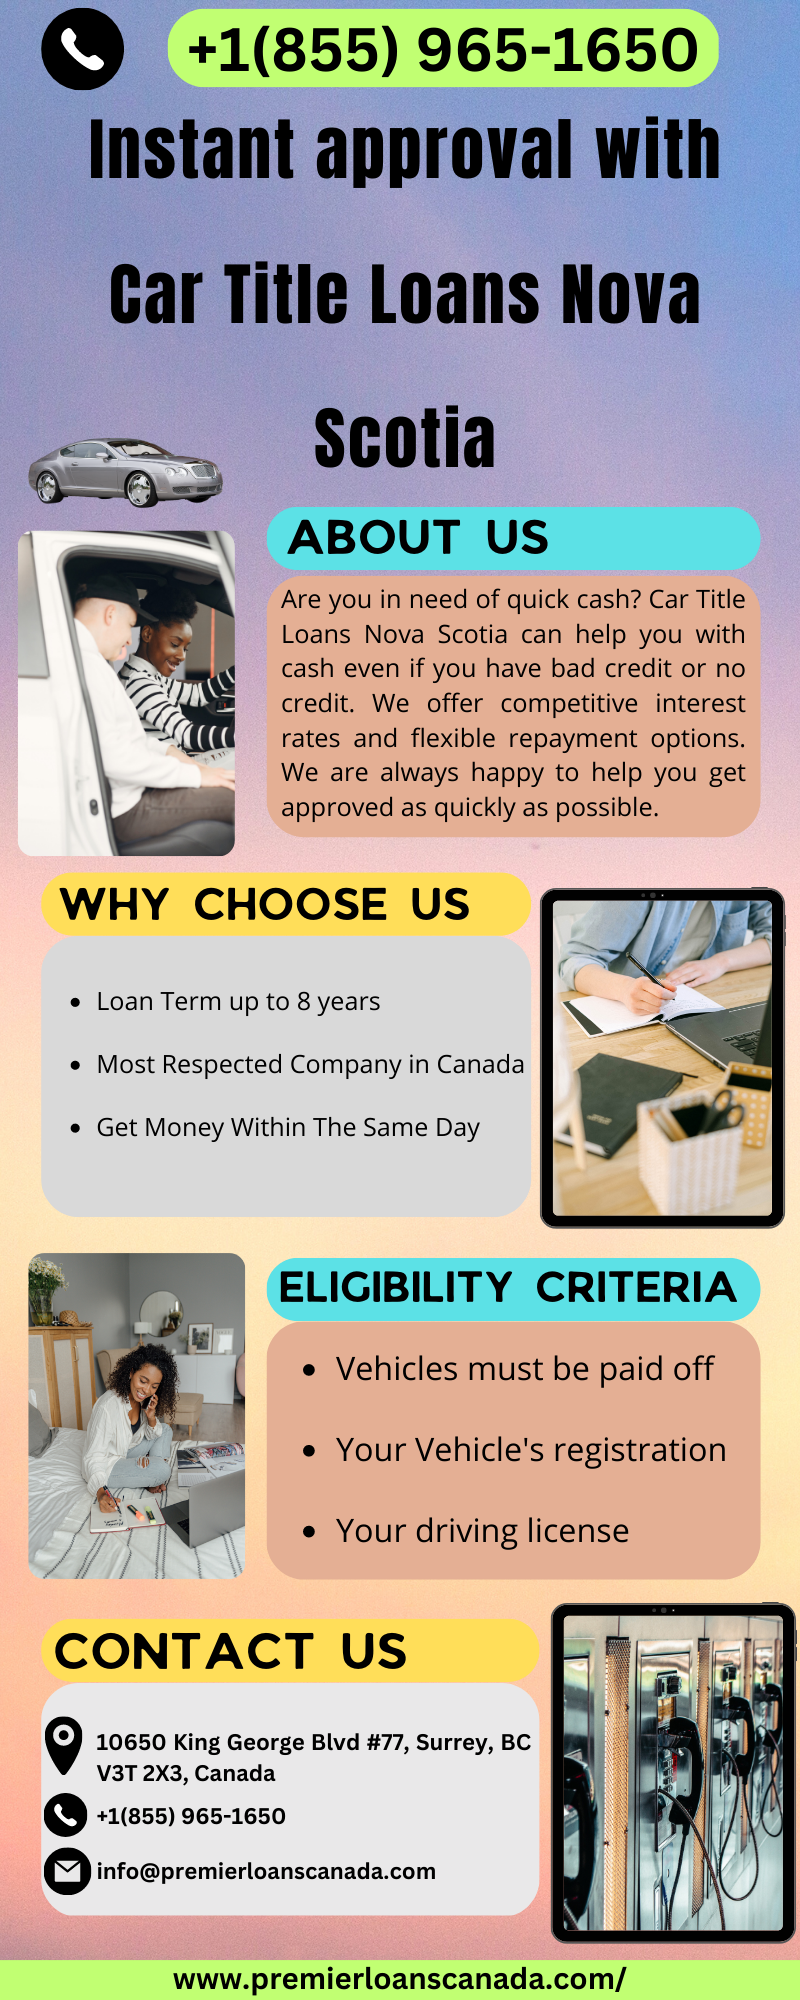 Instant approval with Car Title Loans Nova Scotia with no credit checks